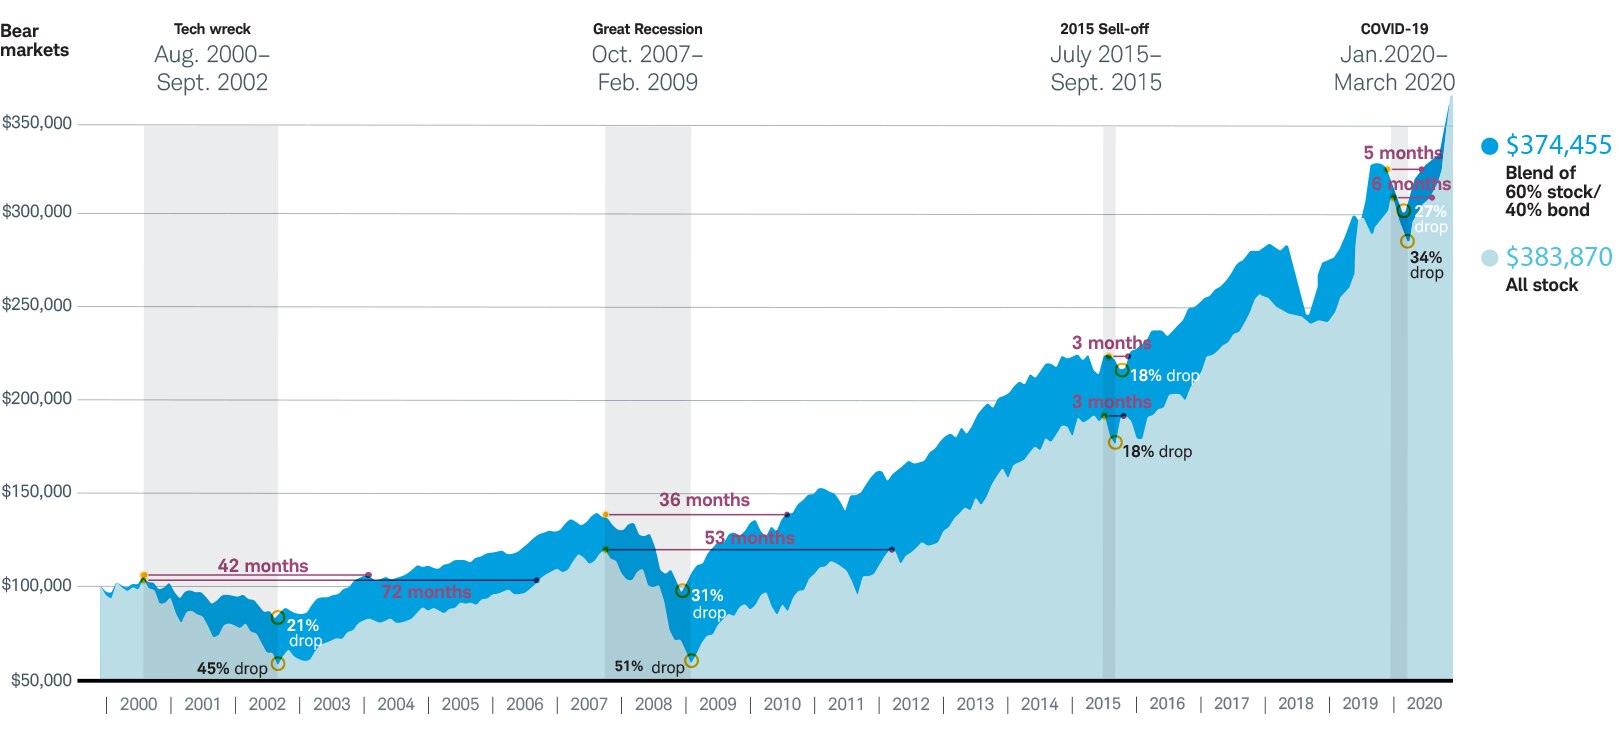 Line chart showing that steep declines are difficult for investors to bounce back from. The chart shows how an all-stock portfolio can take much longer than a diversified portfolio to return to prior peaks over time.